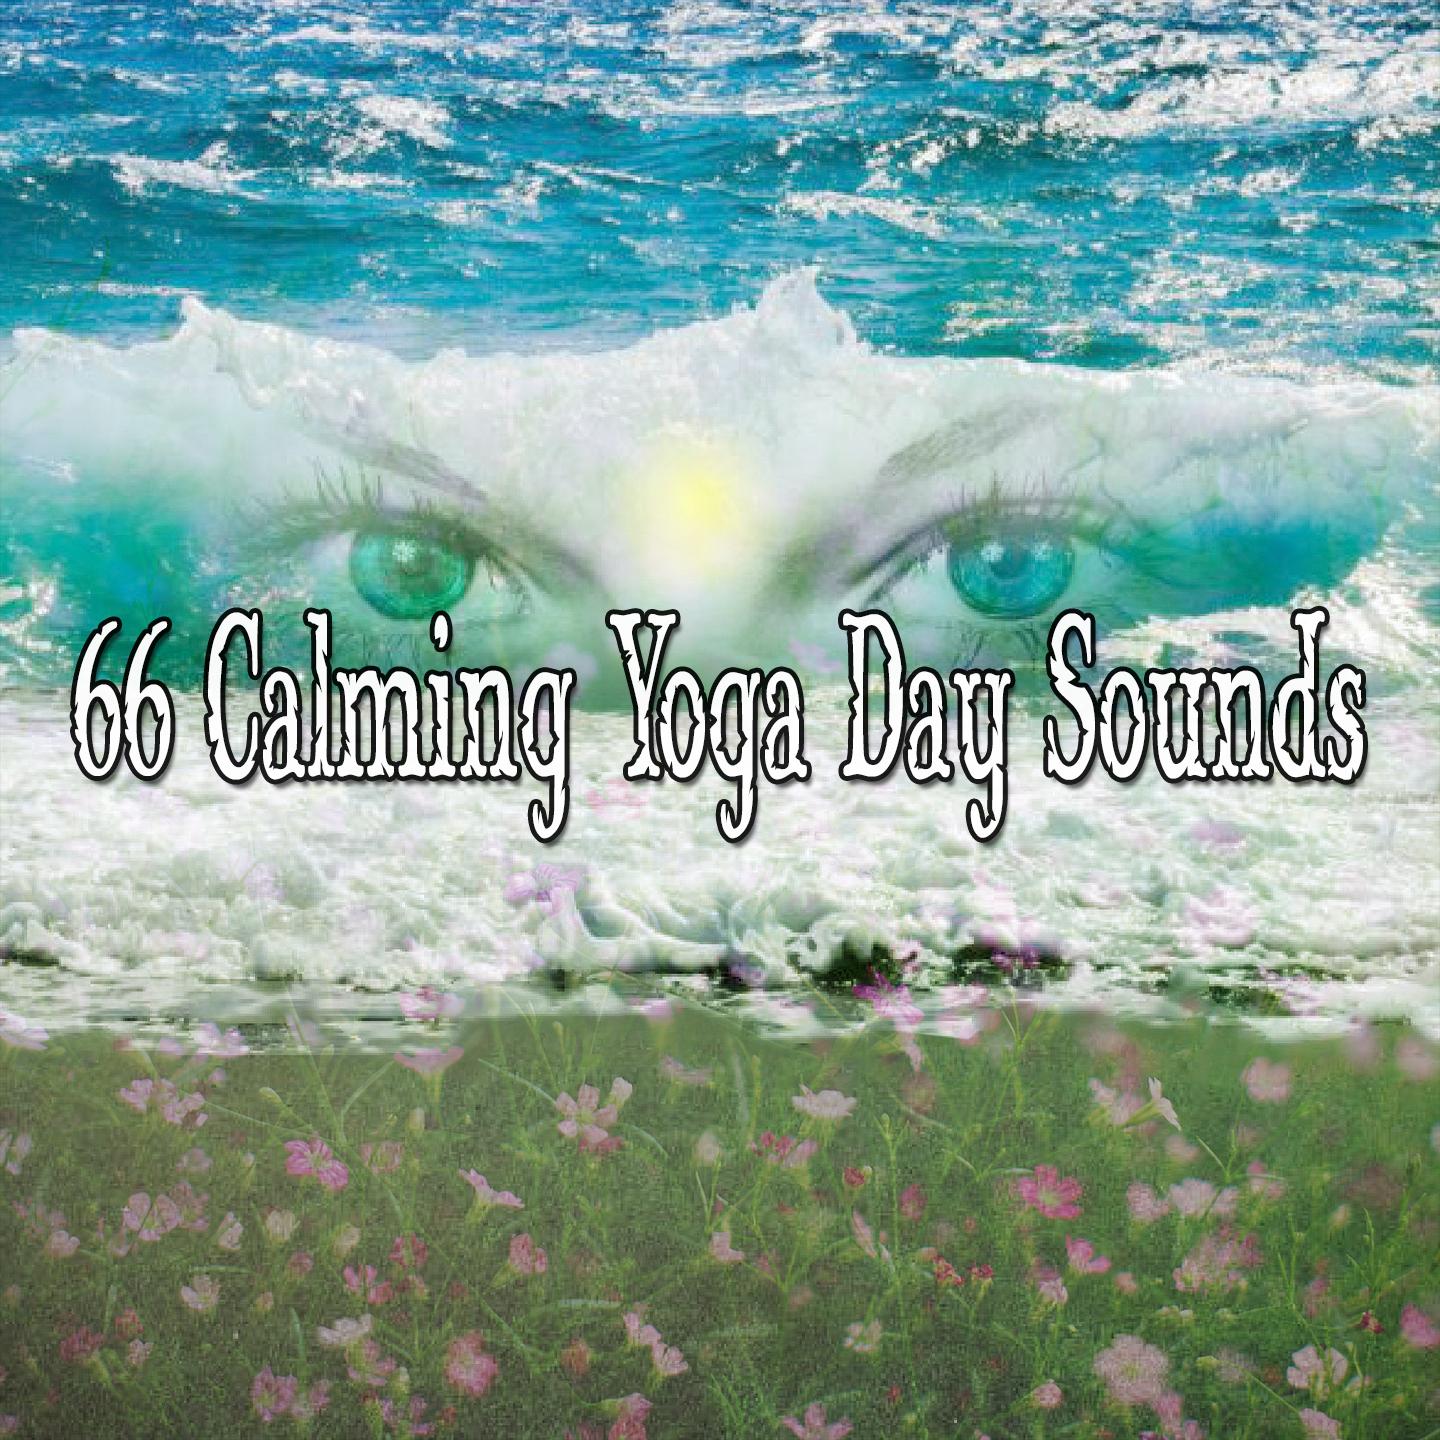 66 Calming Yoga Day Sounds